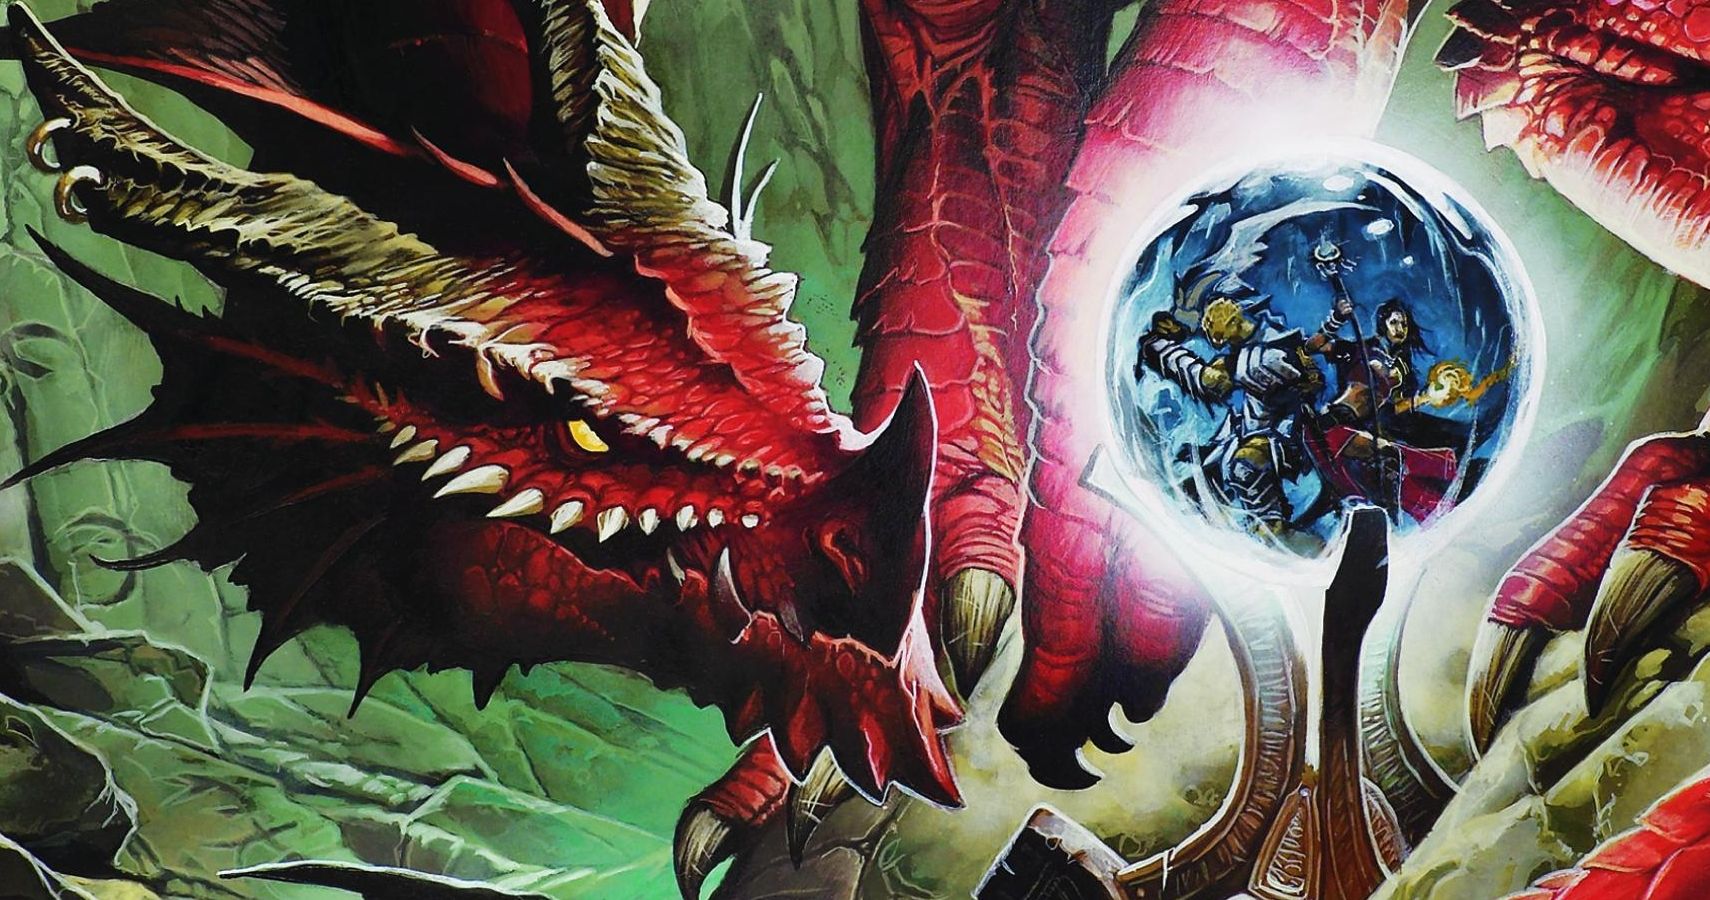 A dragon peers through its crystal ball at unwitting adventurers